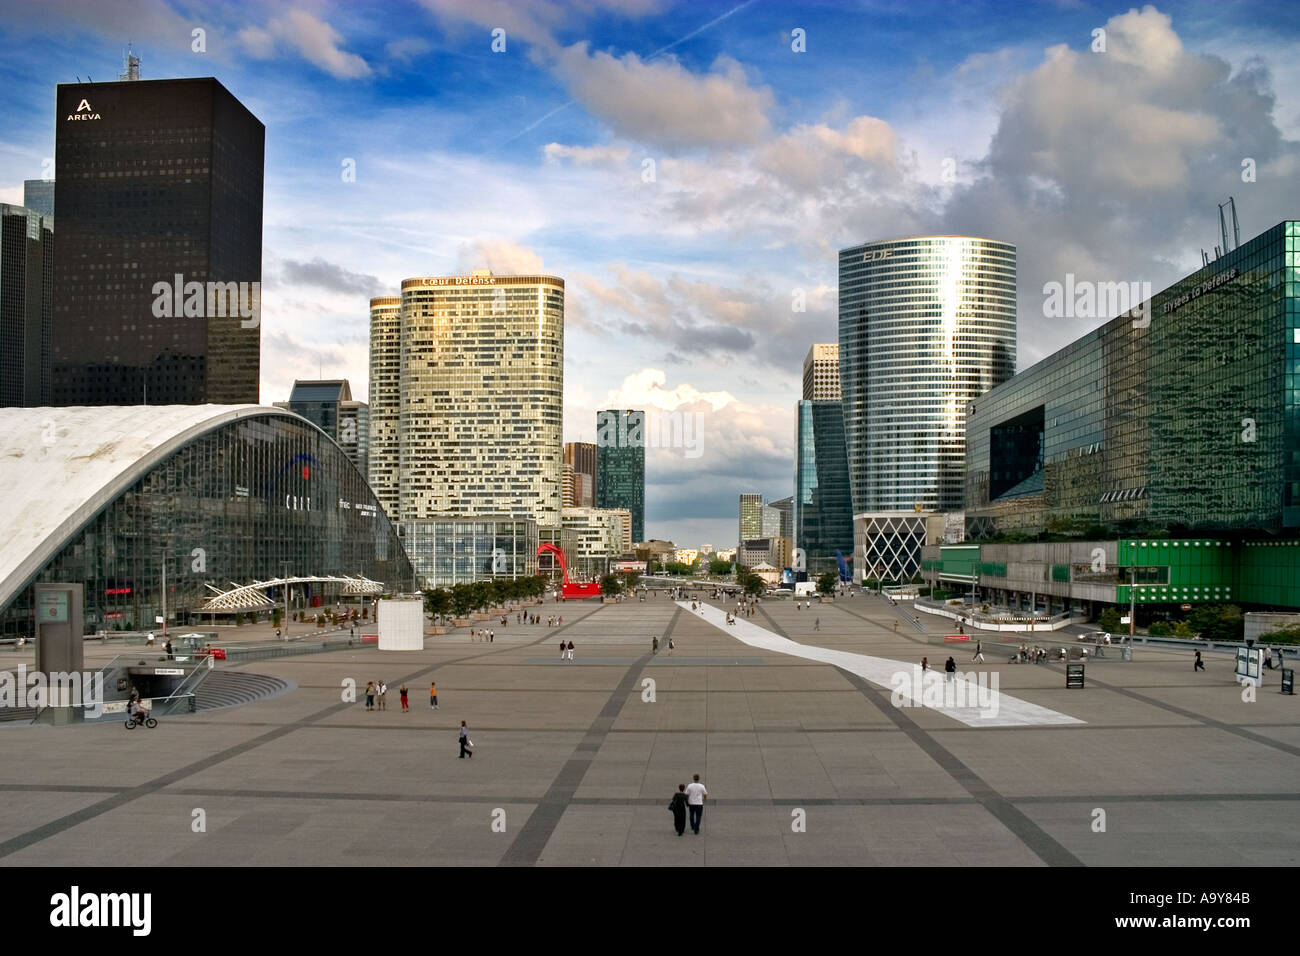 Skyscrapers and ground area in front of La Defence arch Paris France Europe Stock Photo